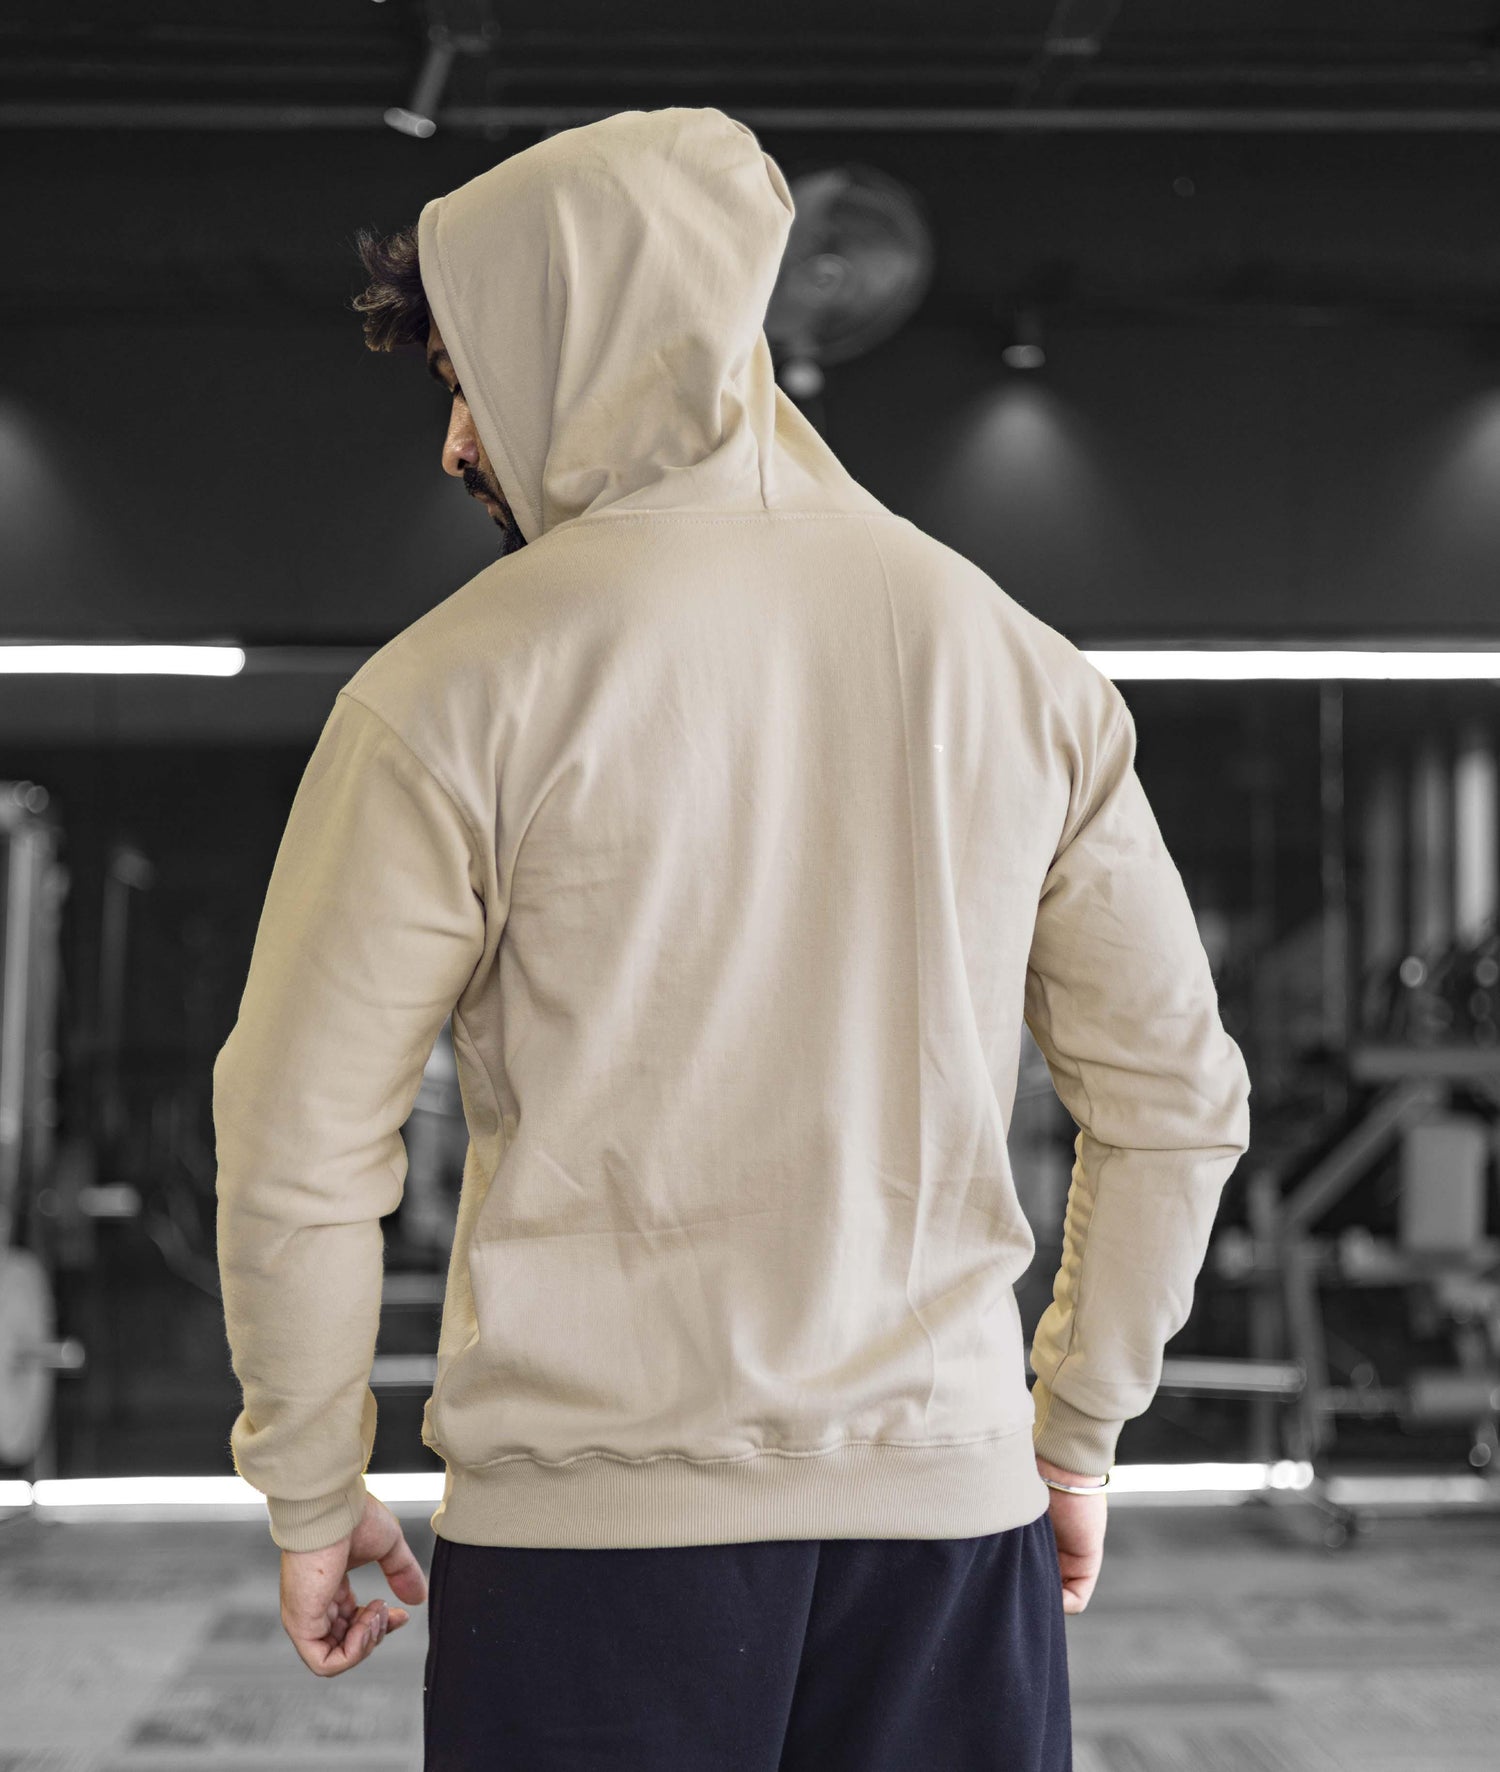 Signature Oversized GymX Hoodie: Beige - GymX